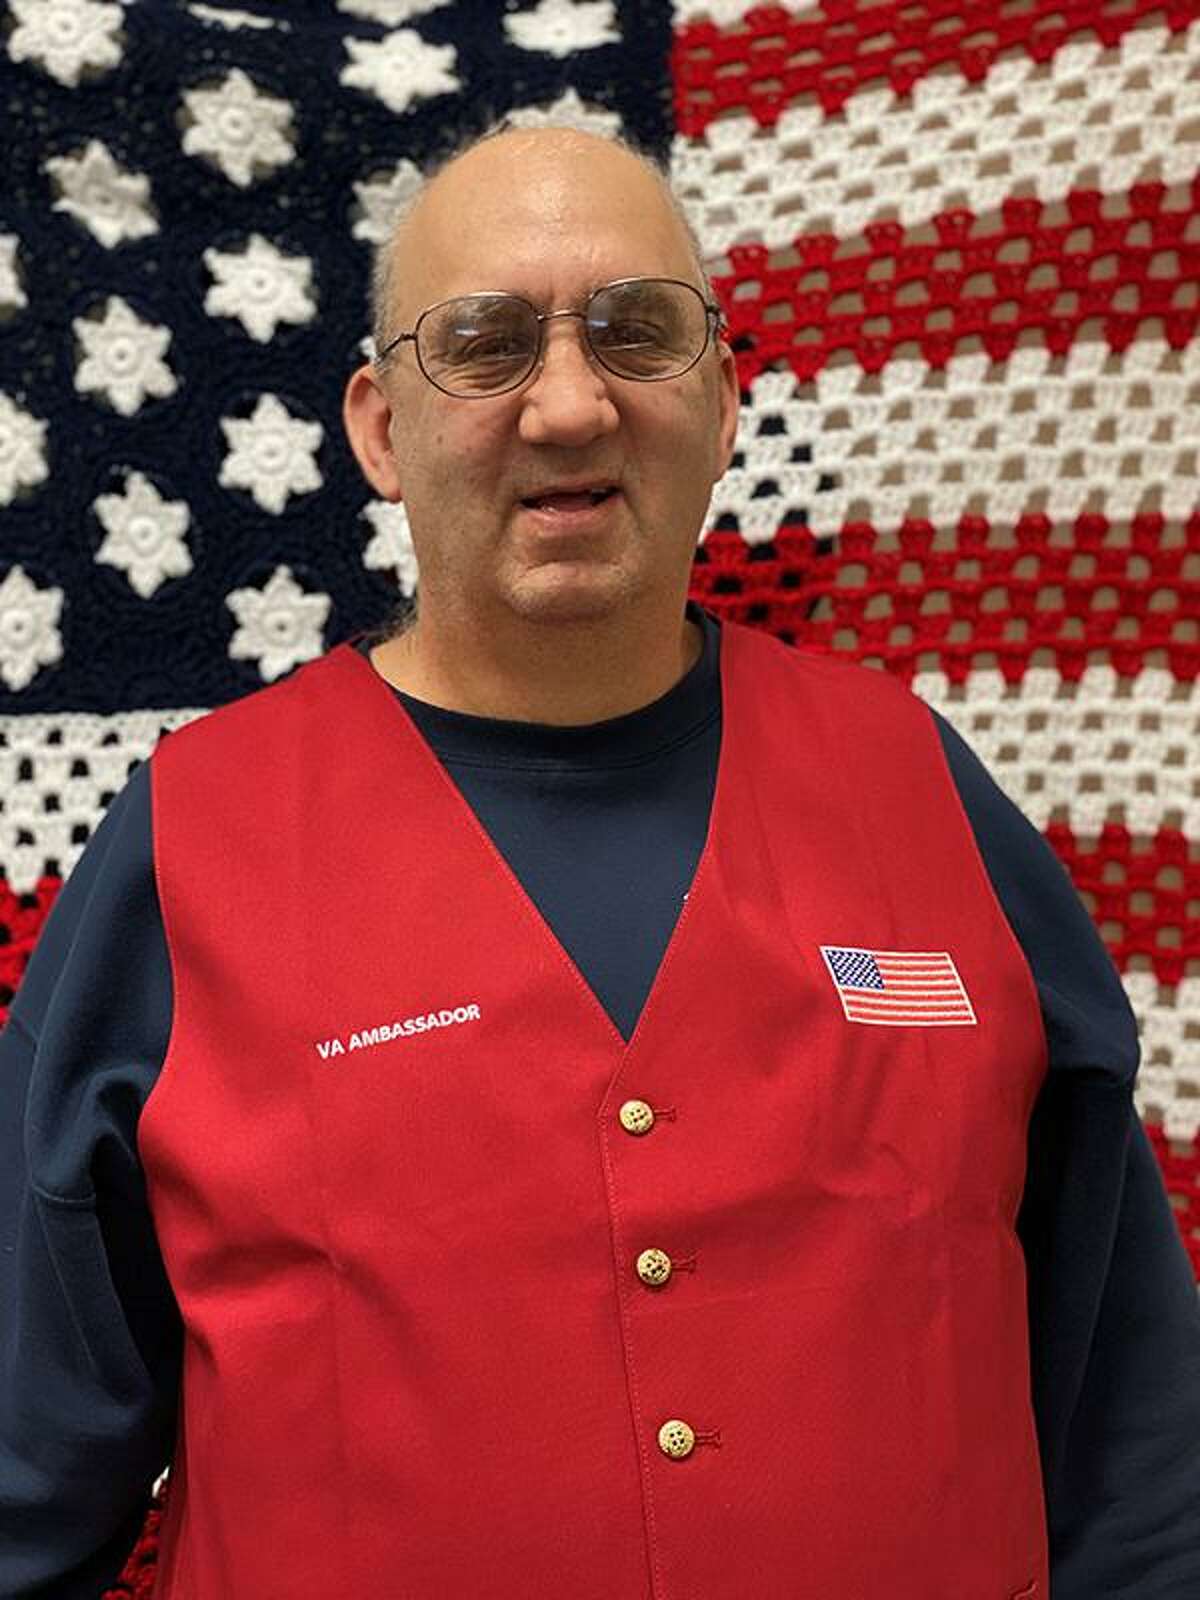 U.S. Army veteran Eugene Onofrio, of West Haven is the recipient of the 2020 DAV George H. Seal Memorial Trophy by Disabled American Veterans. Each year, this prestigious award honors DAV’s top volunteer through the Department of Veterans Affairs Voluntary Service Program, according to a statement. Onofrio has dedicated 26 years of his life to volunteer work. He is the chaplain for the DAV Department of Connecticut, where he has been a member for 30 years, members said. He has provided more than 15,000 hours of his time serving veterans in the VA Connecticut Healthcare System. He spends time assisting wherever he is the most needed, including voluntary services, recreation therapy, chaplain services, and Acquisition and Material Management.